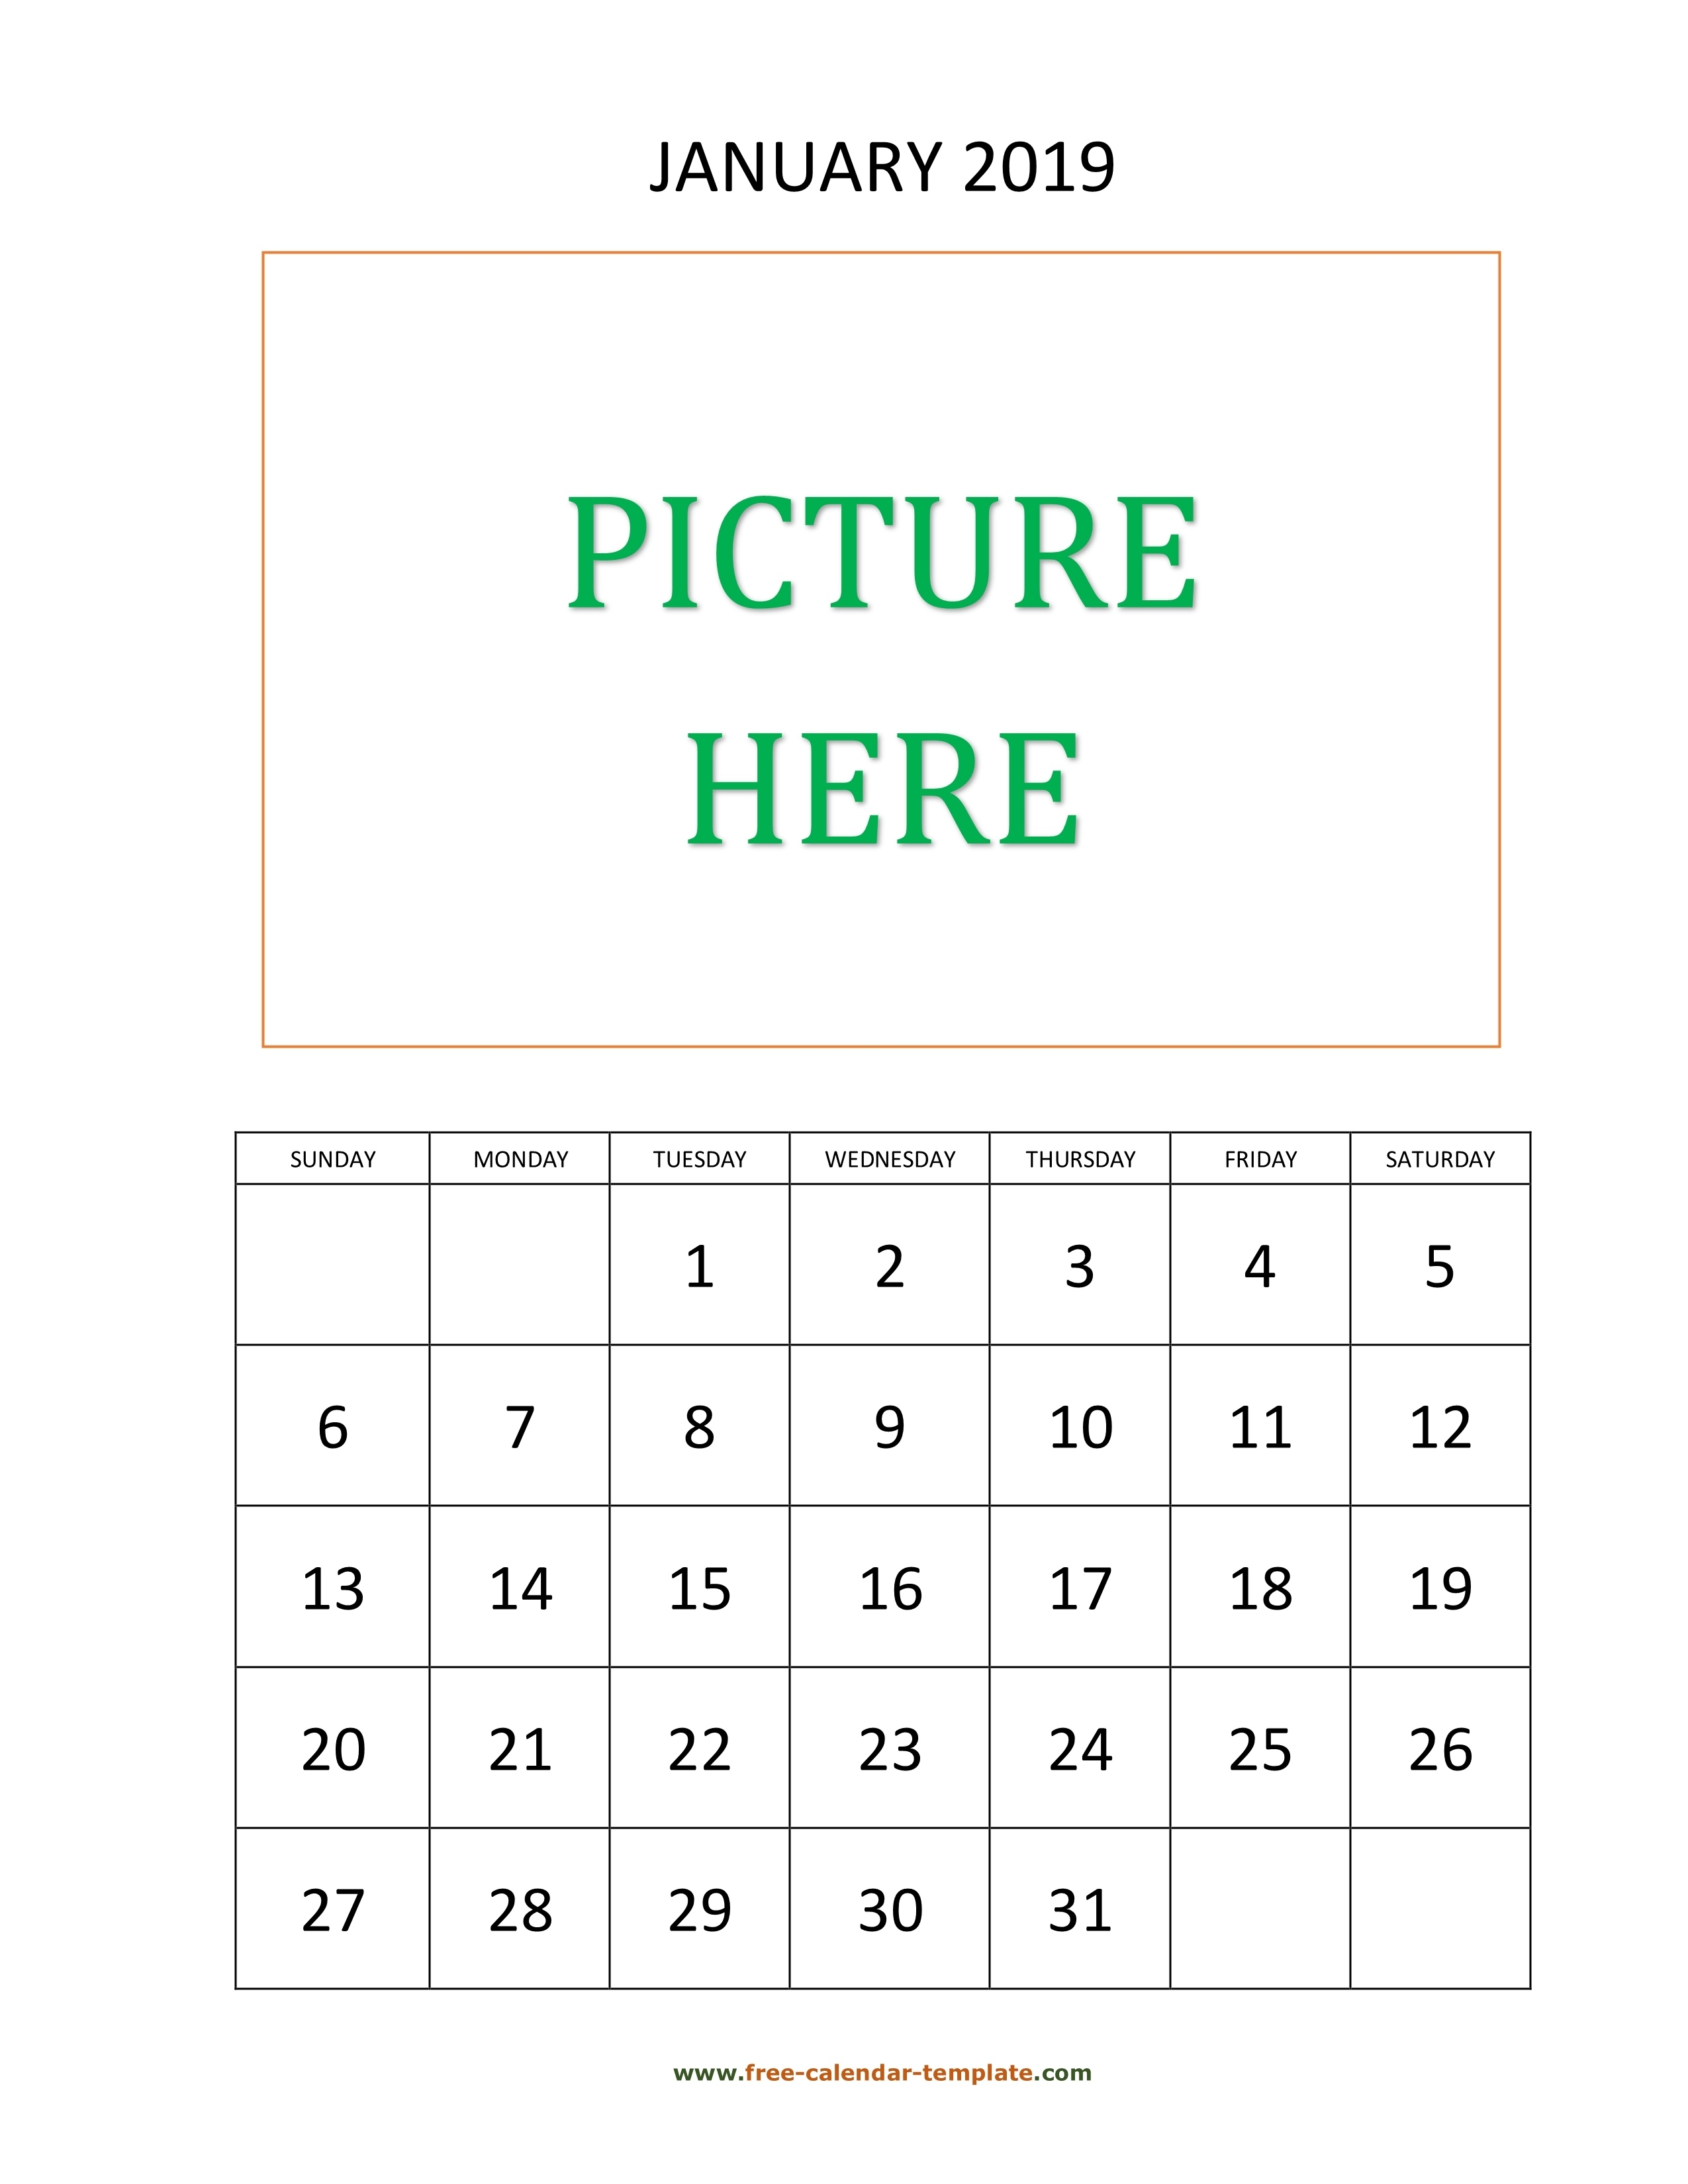 Monthly Printable 2019 Calendar, Space For Add Picture Calendar Template To Add Pictures